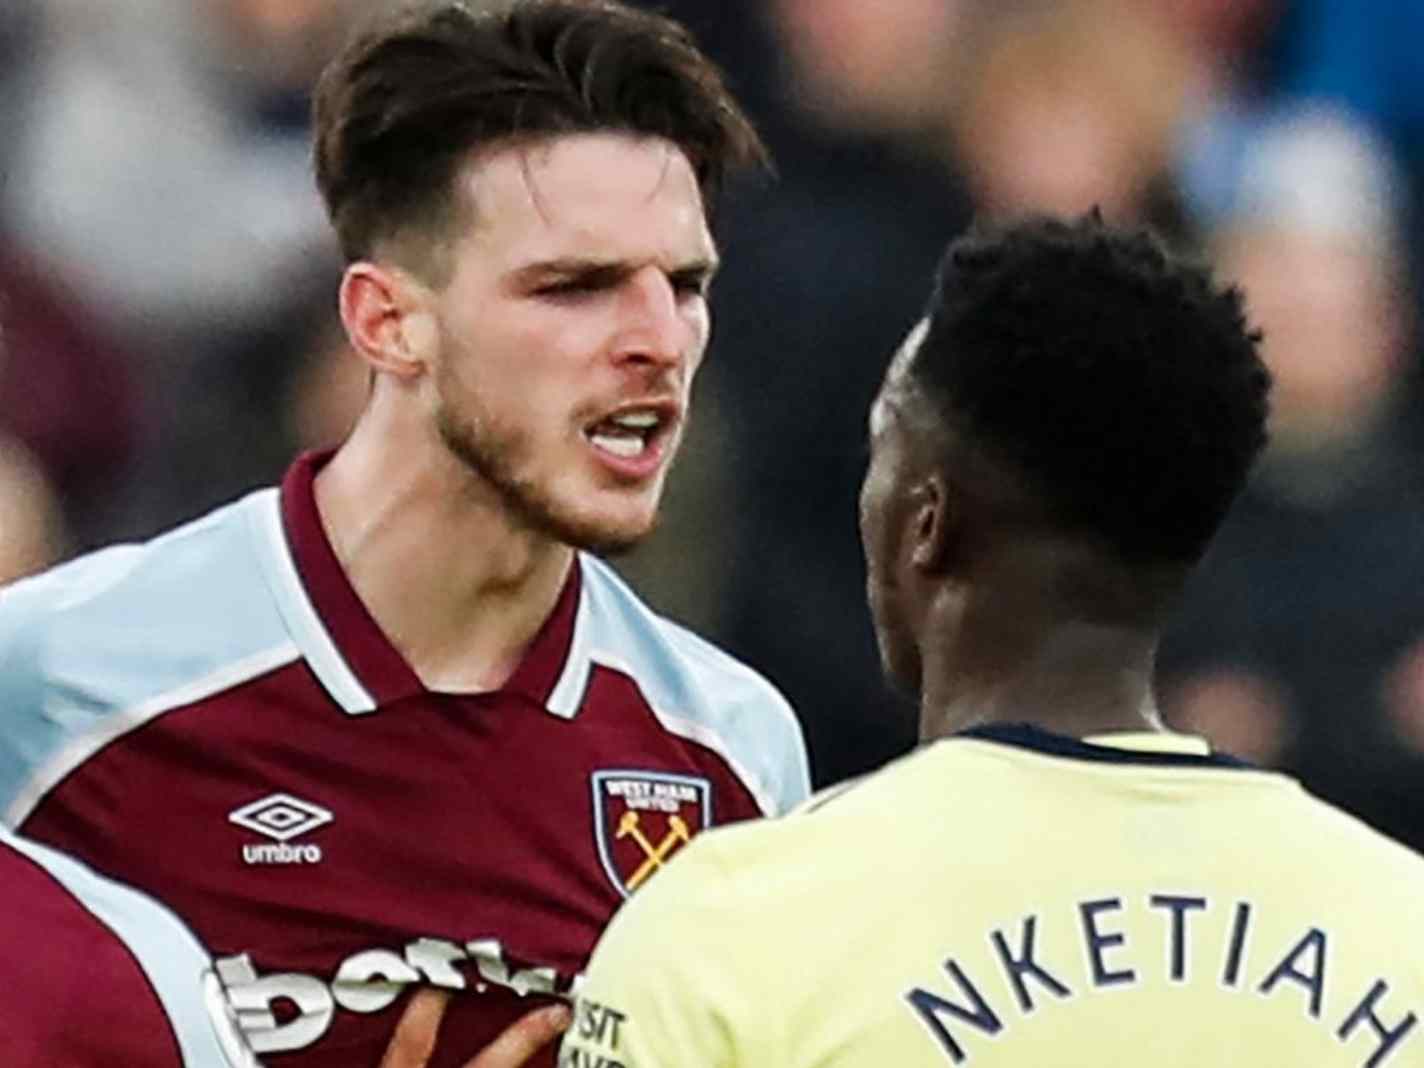 Twitter reacts to furious moment between Declan Rice and Eddie Nketiah